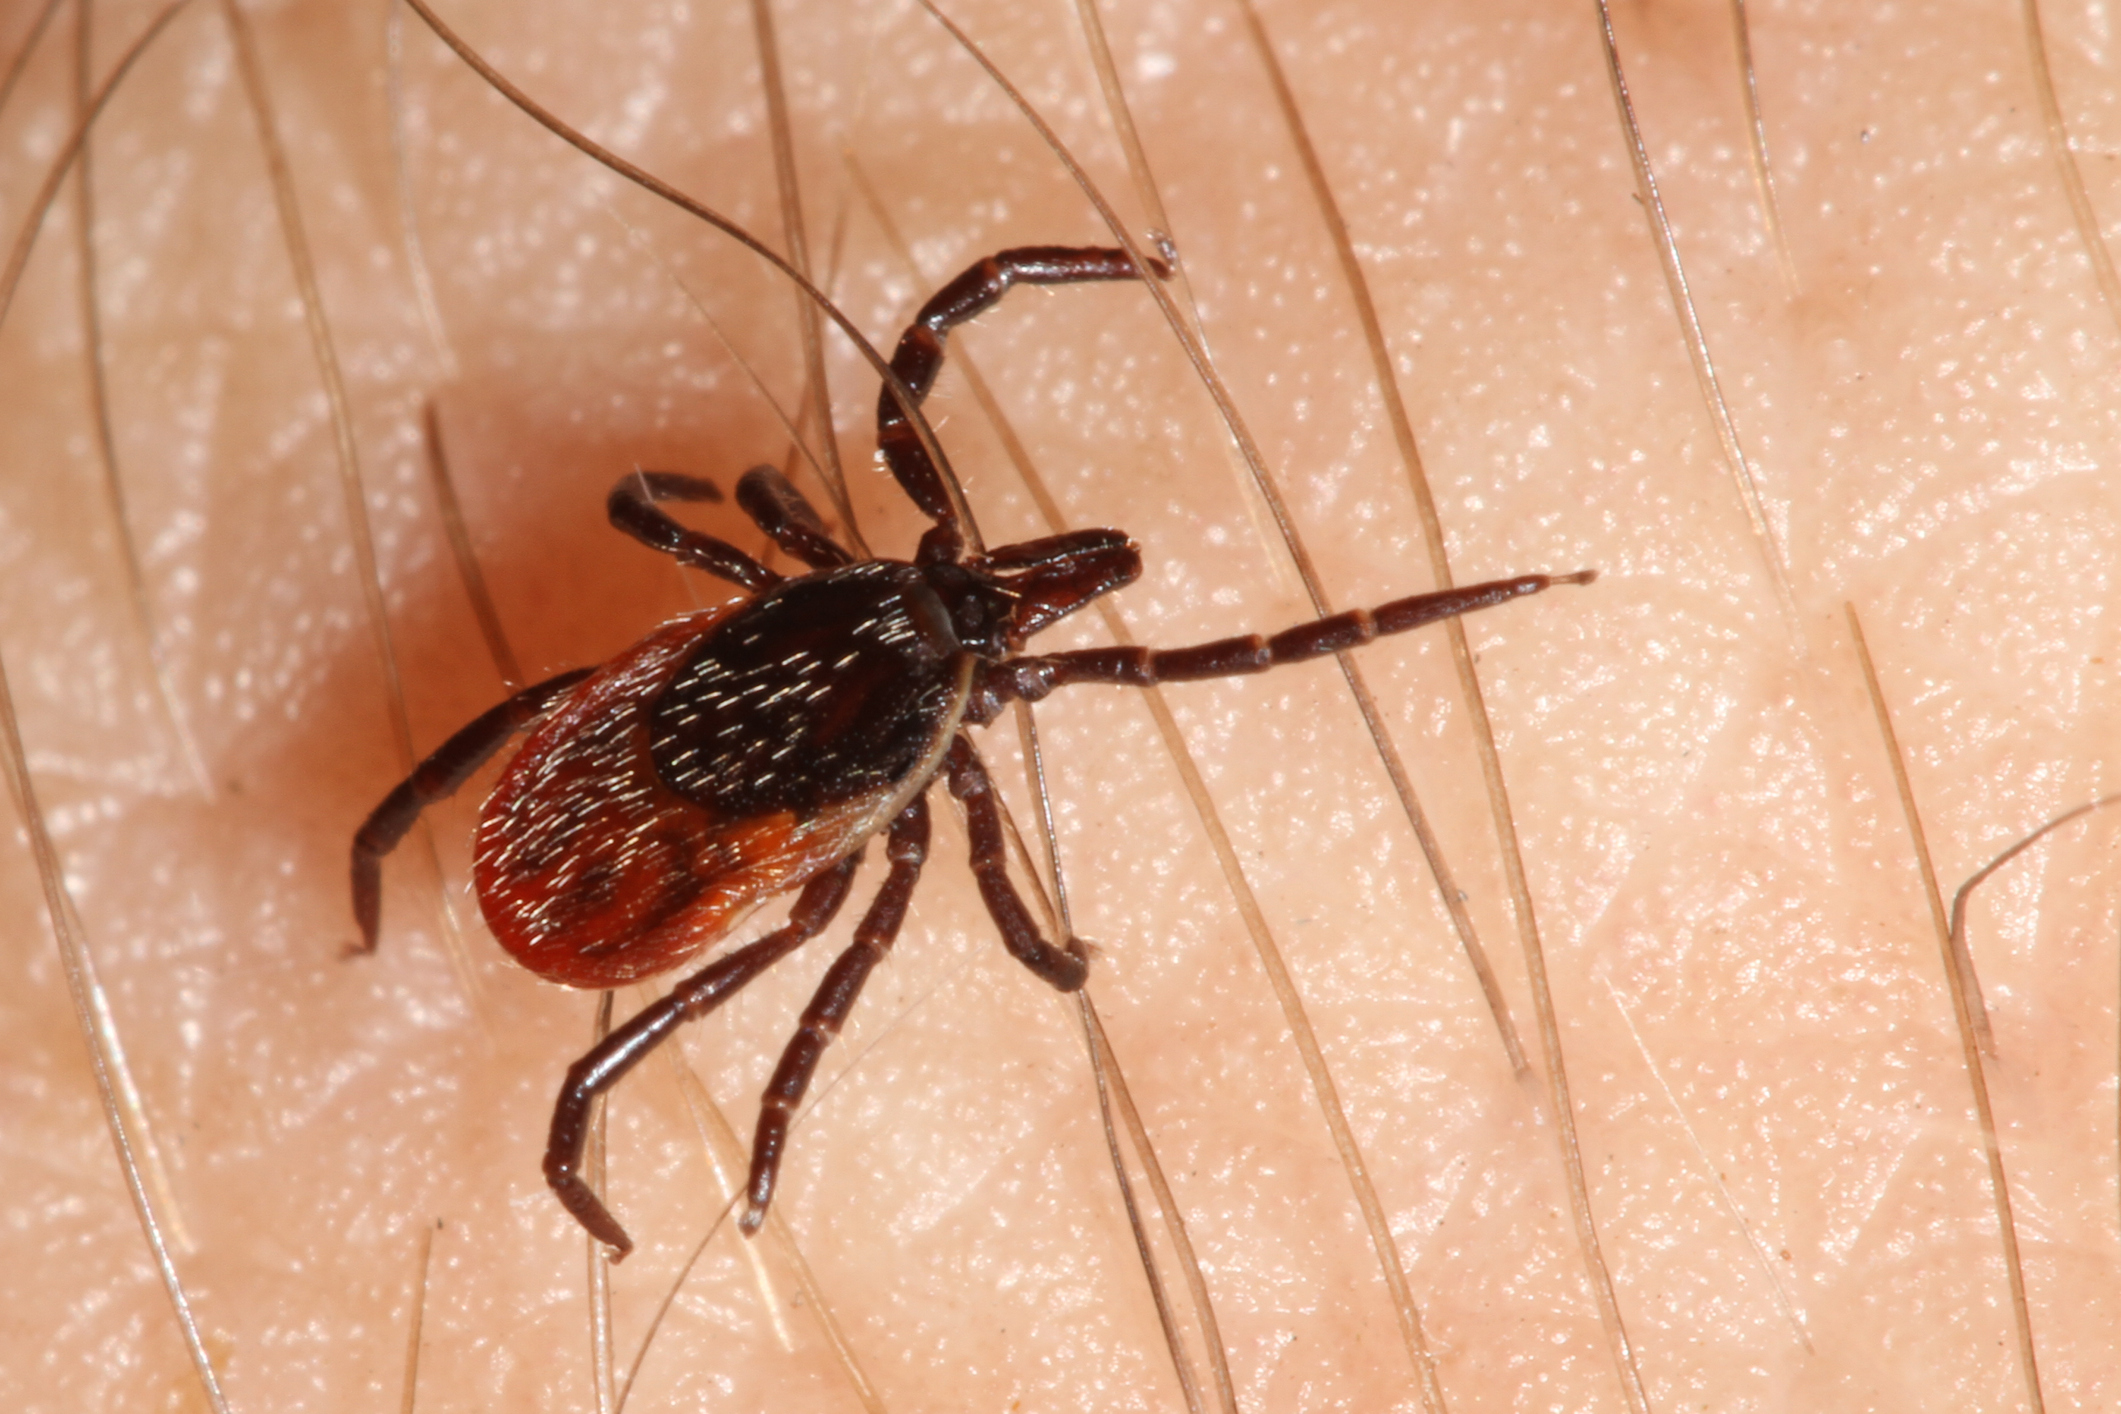 Lyme disease can prevent the imm...